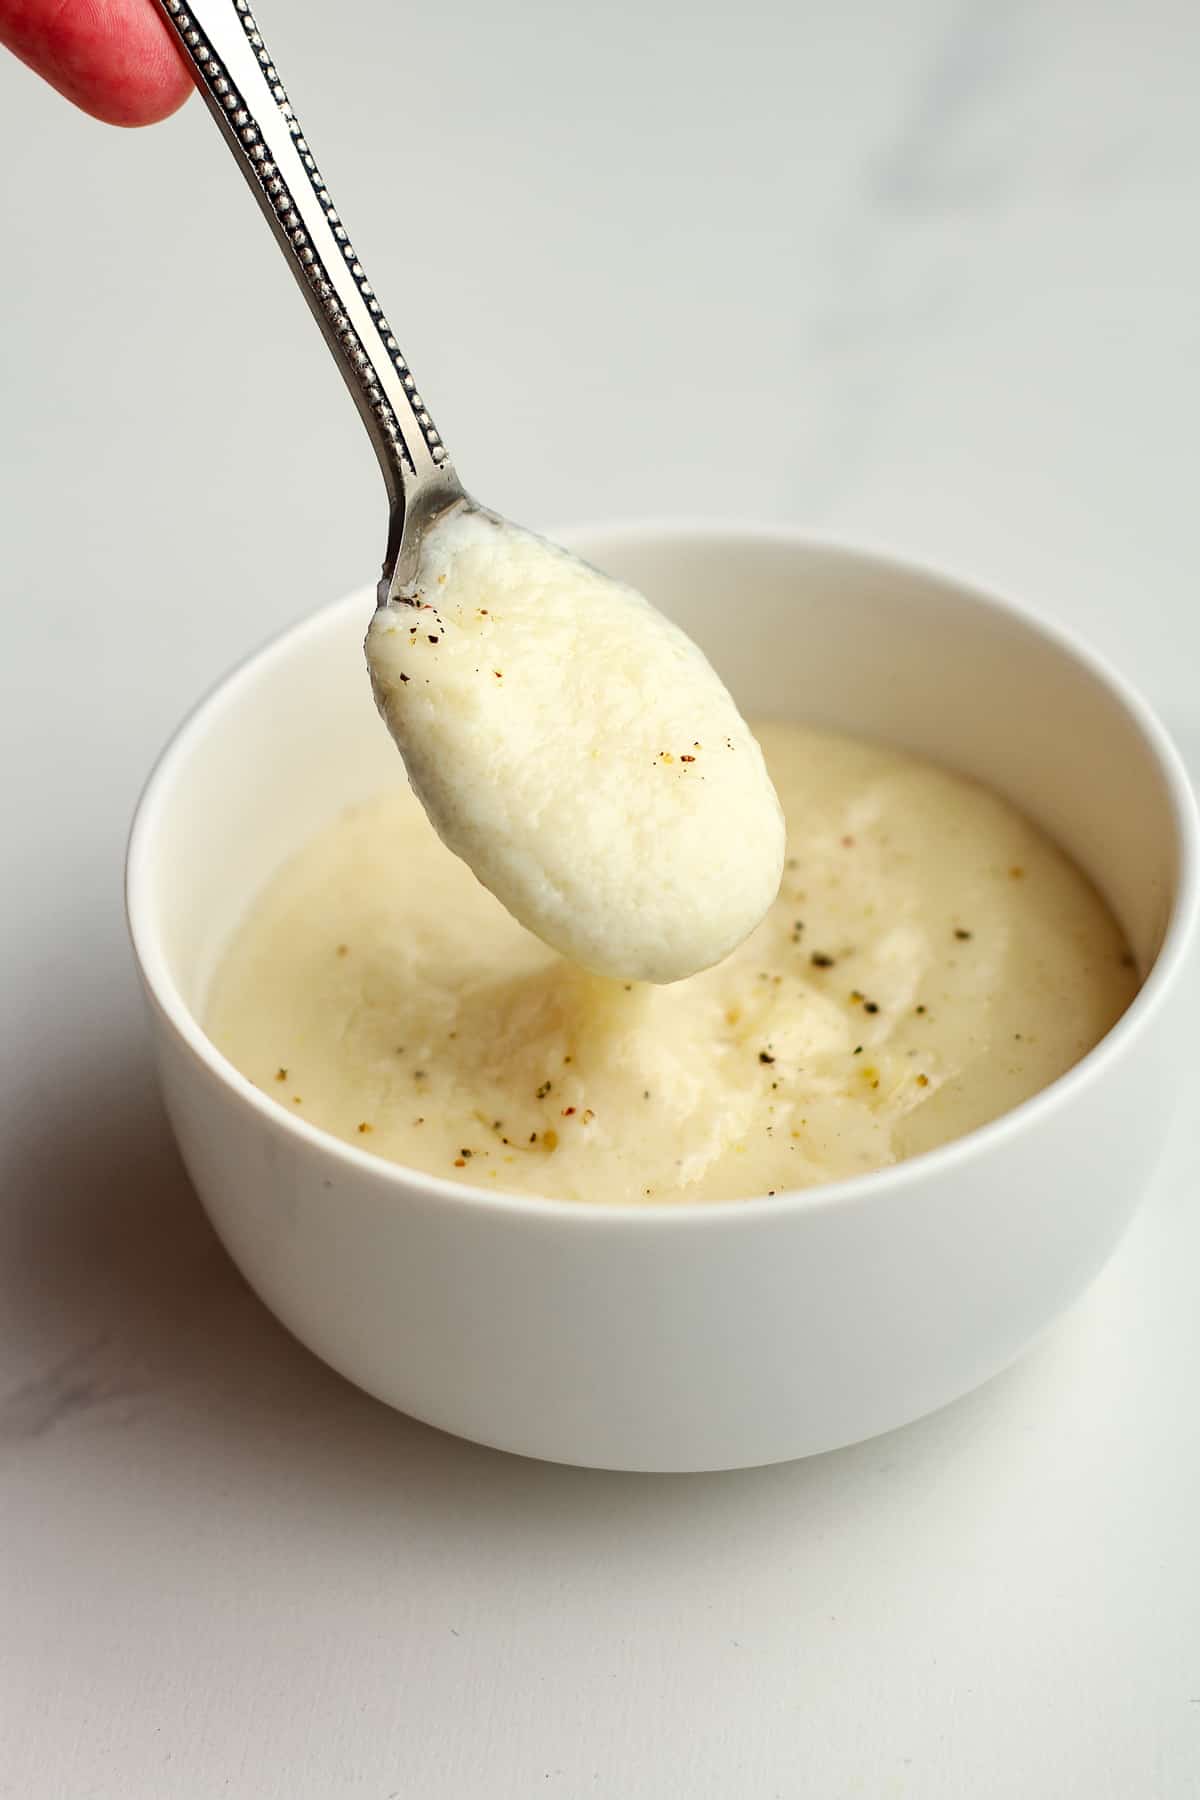 A spoon of the white sauce over a bowl.